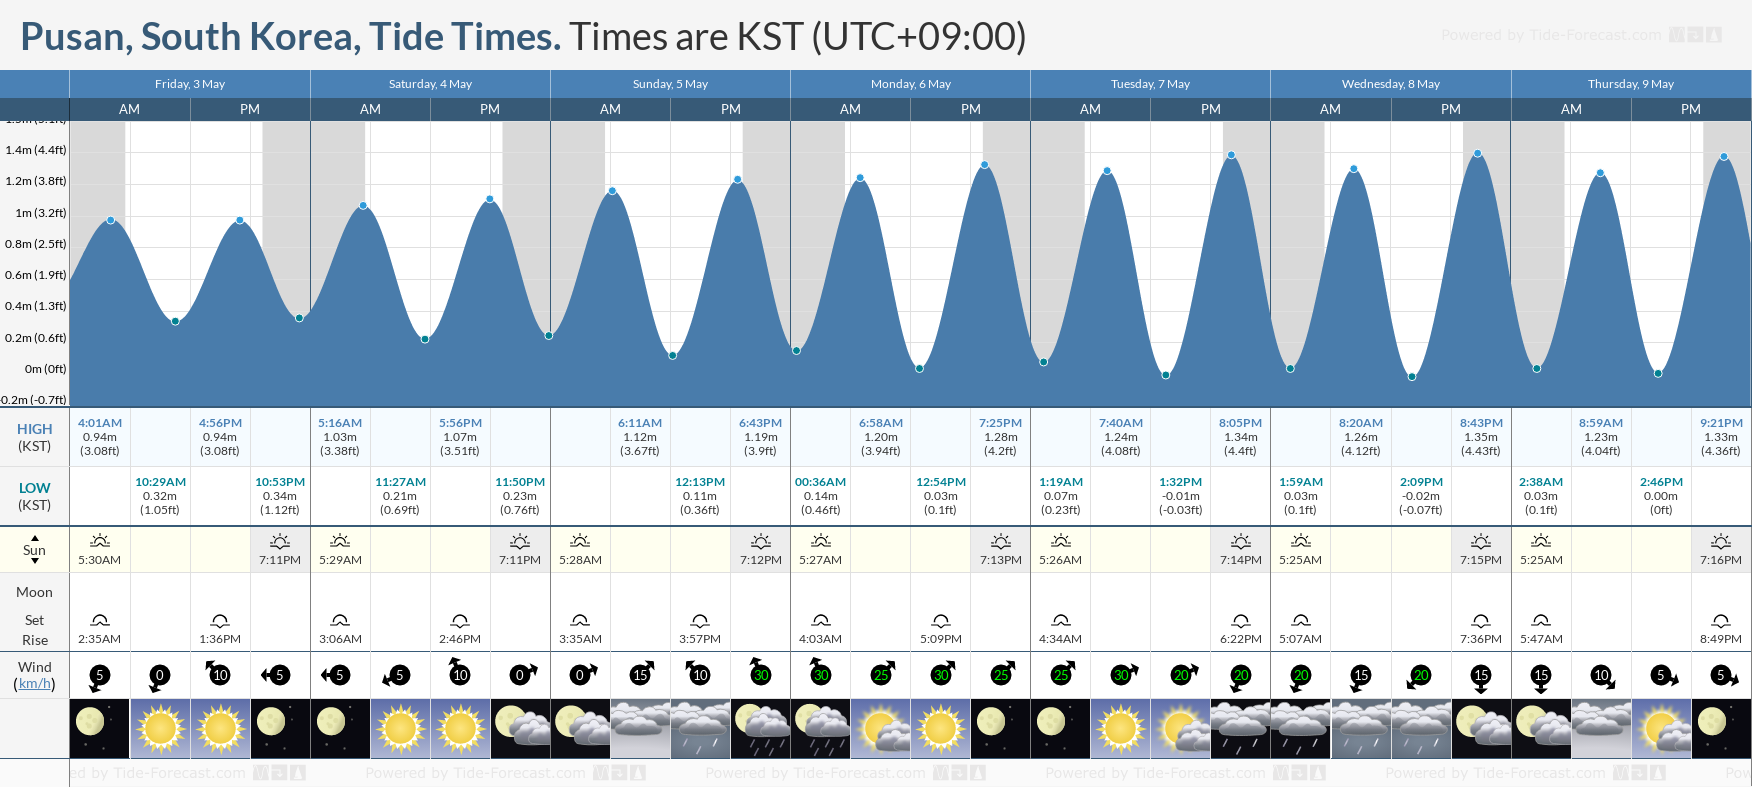 Pusan, South Korea Tide Chart including high and low tide tide times for the next 7 days